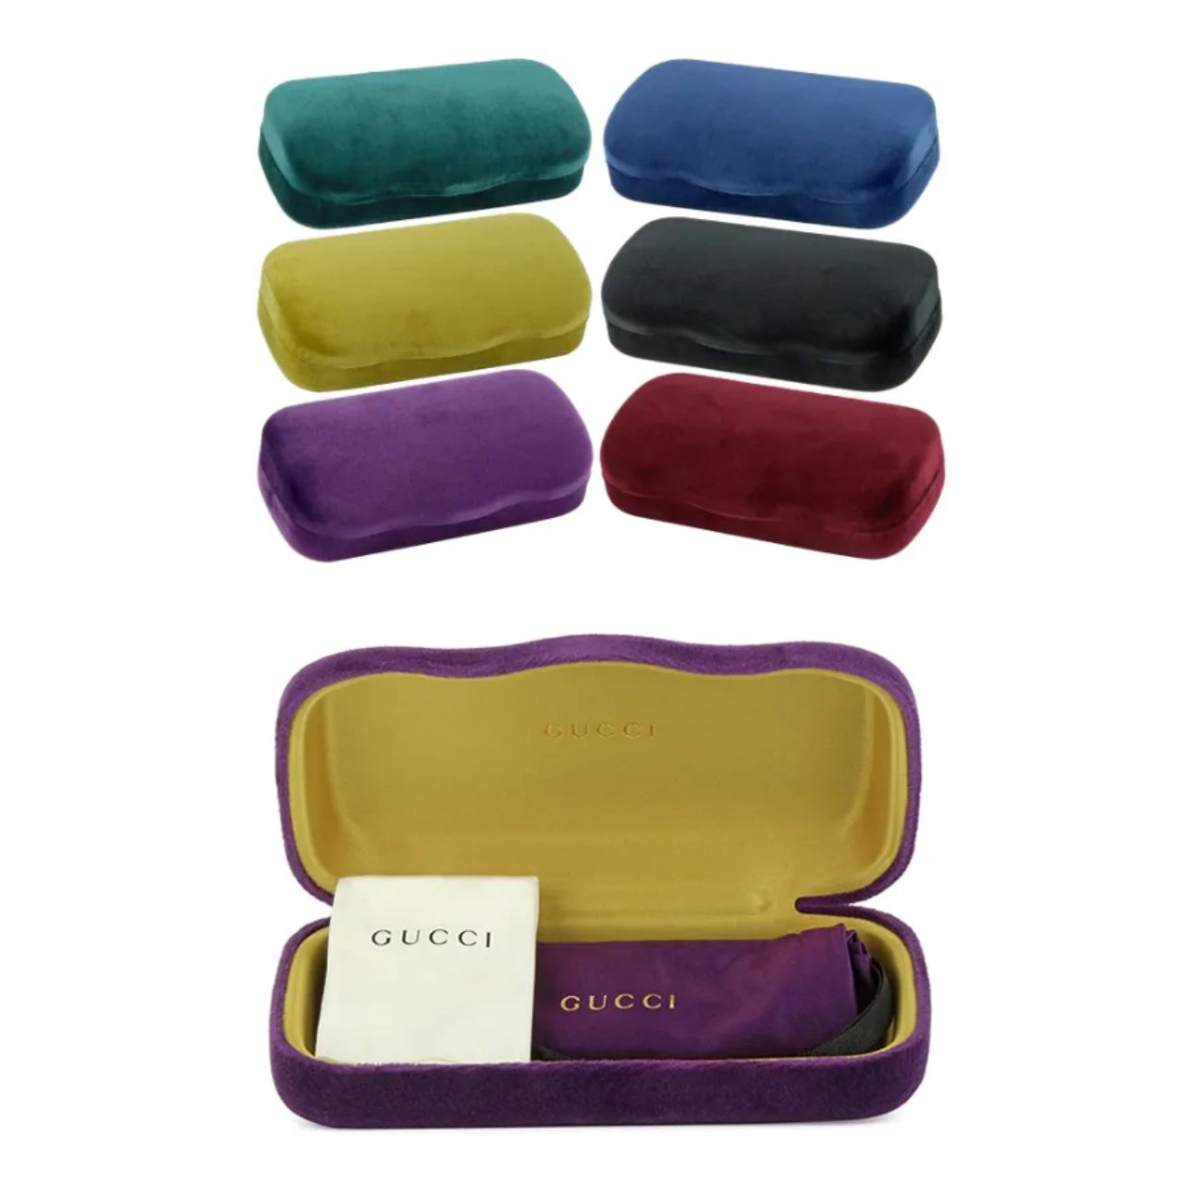 "Gucci Sunglasses Cases | All Colours Available At Optorium"